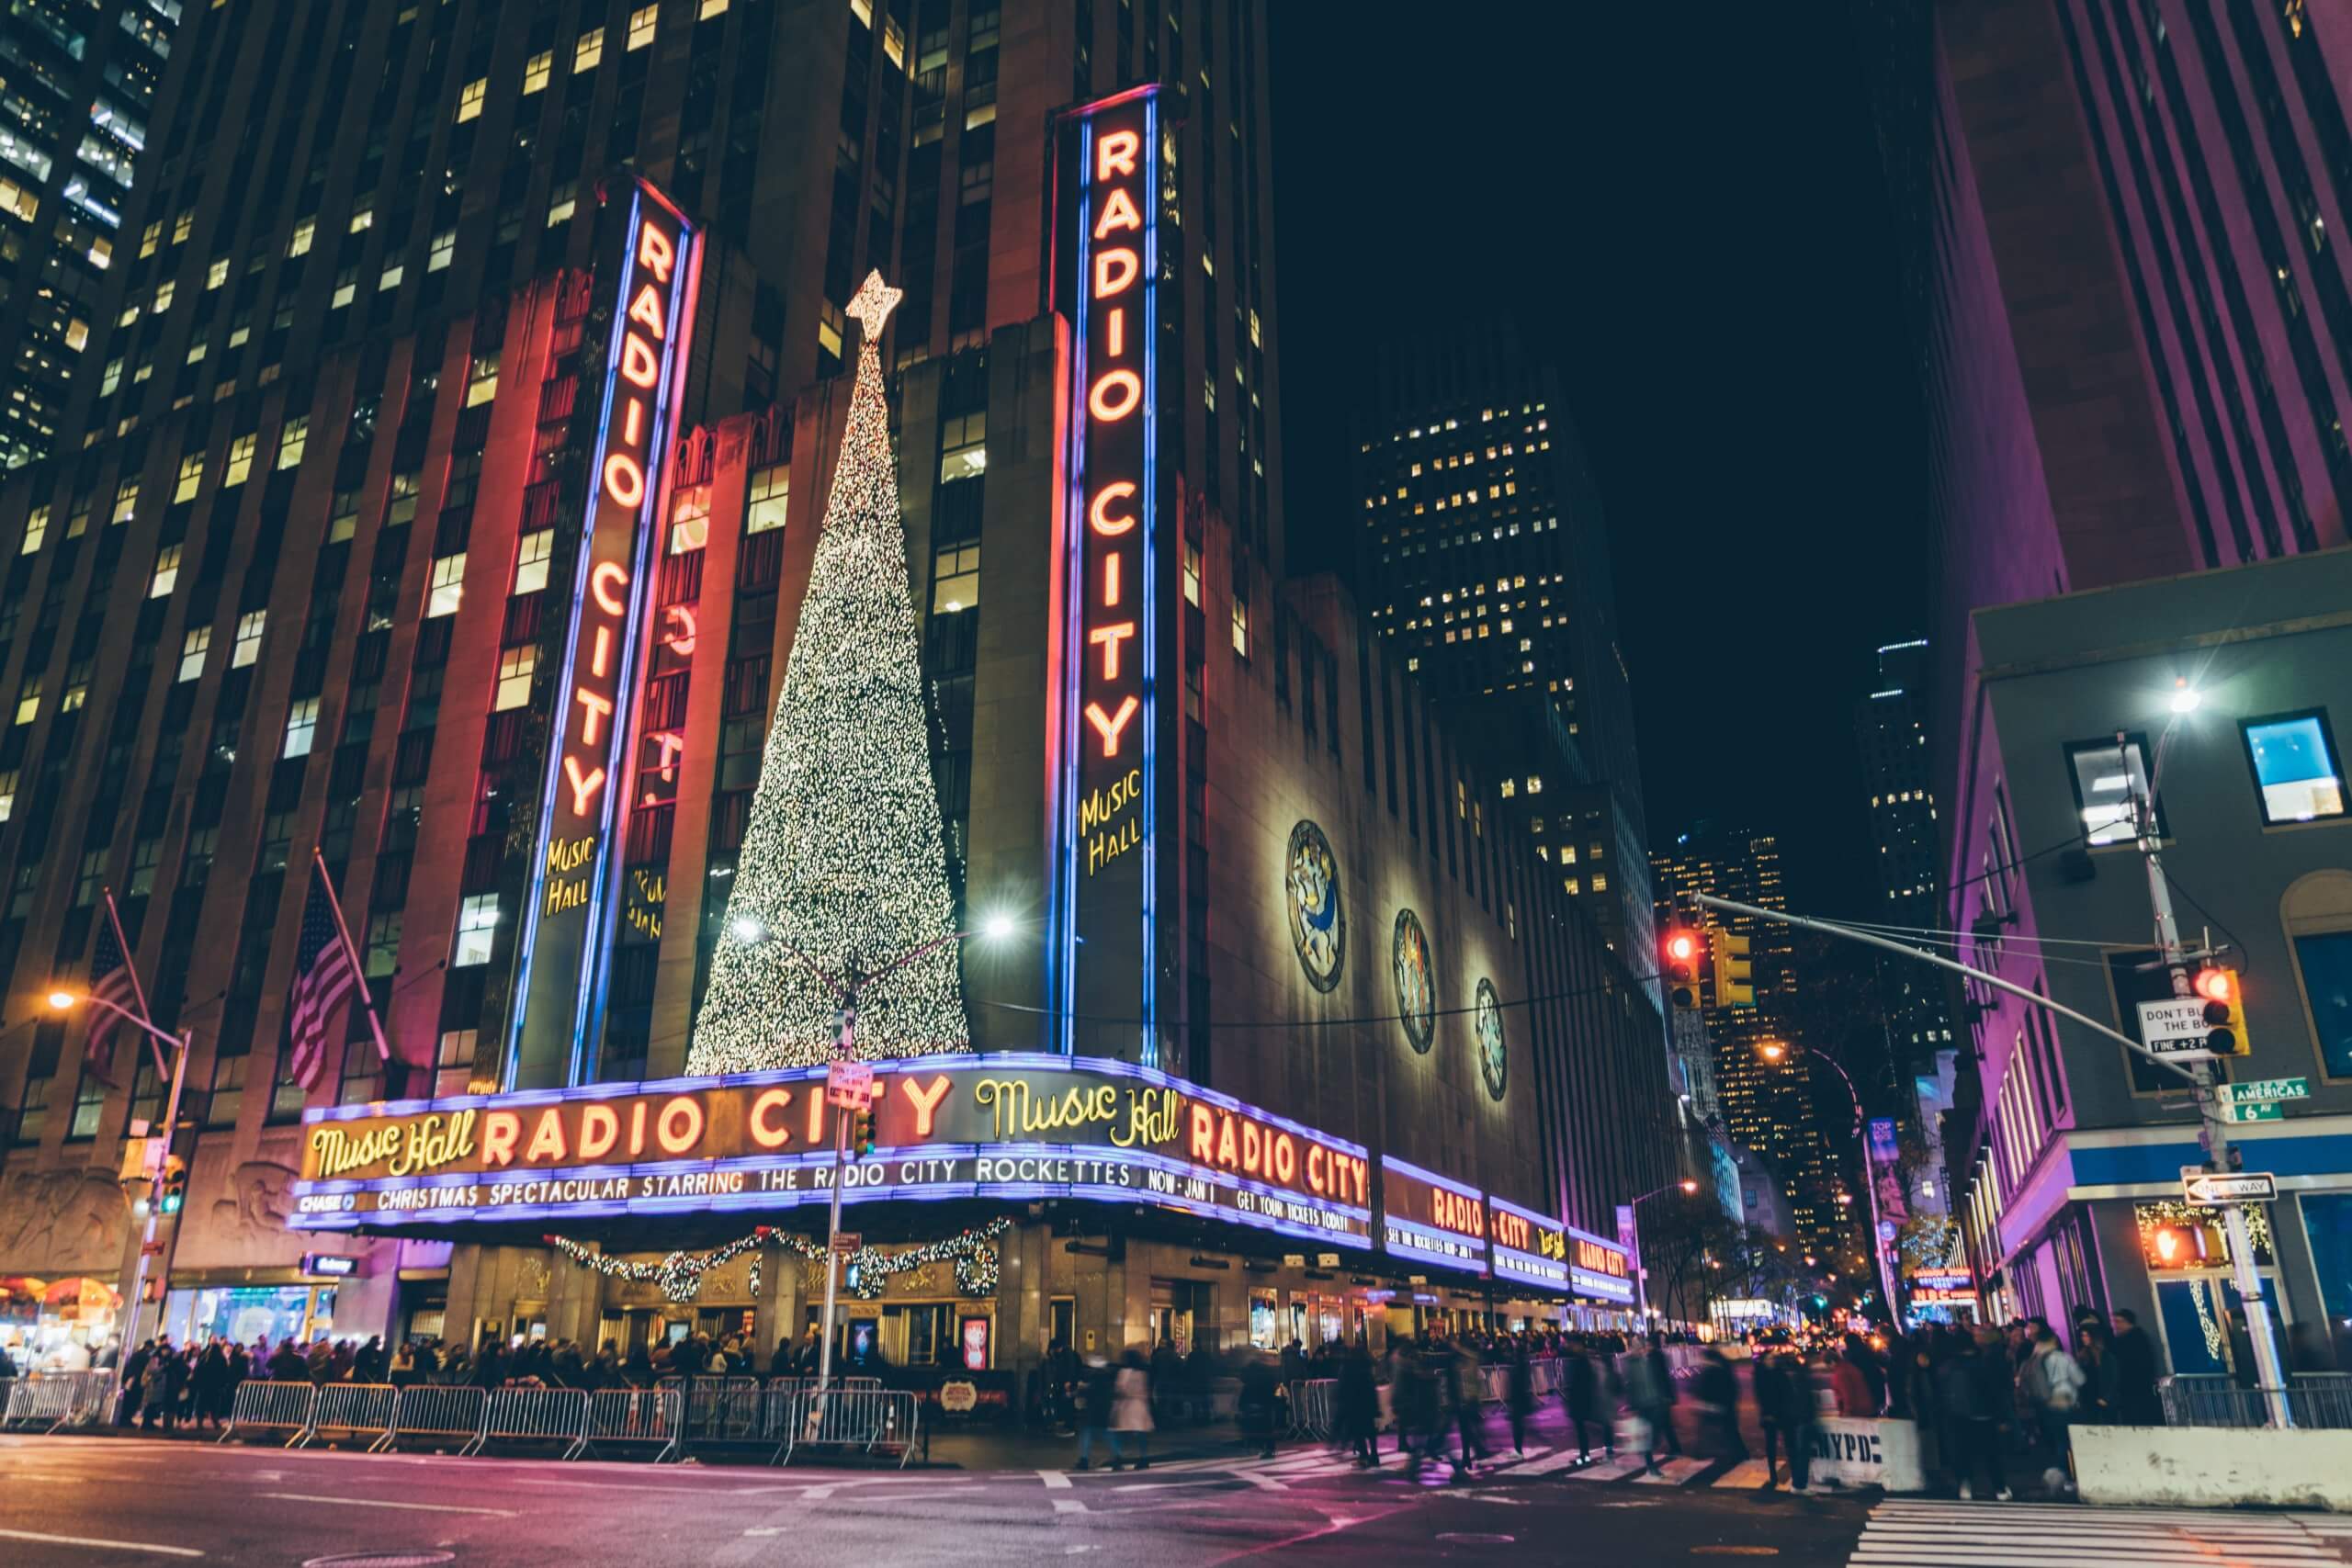 Instagrammable Spots In NYC 2021 - Radio City Music Hall